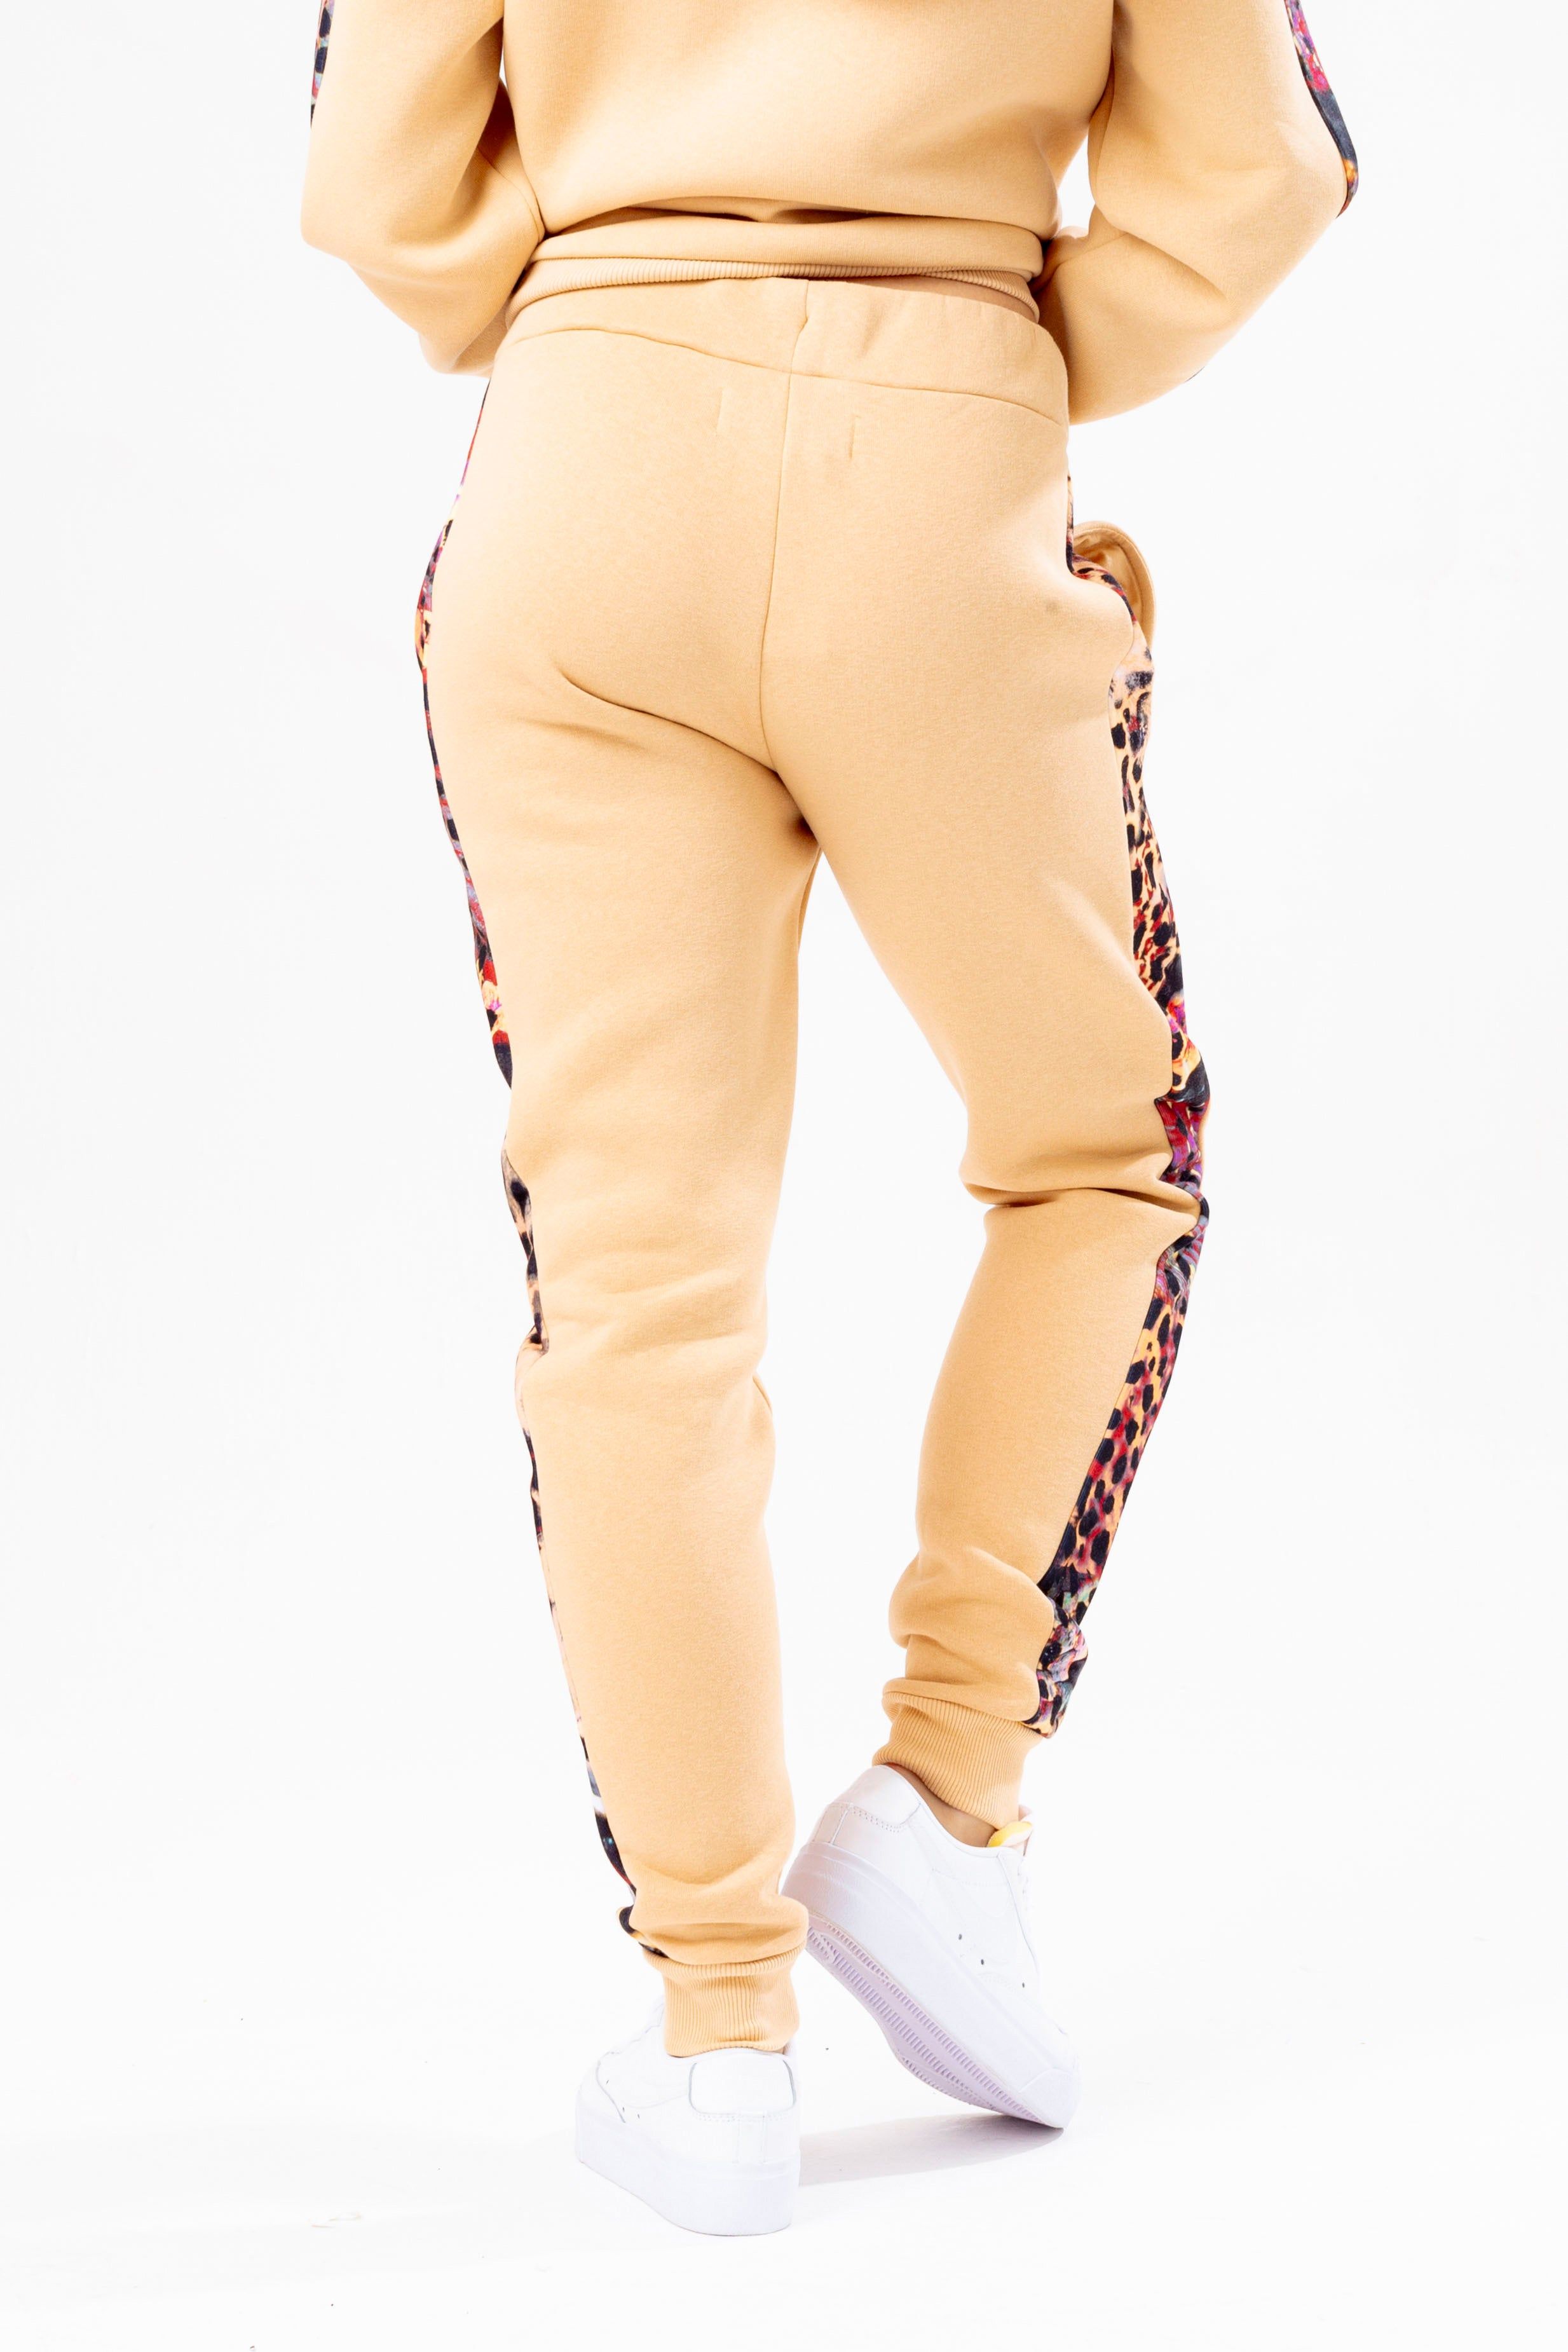 Meet the HYPE. Women’s Hazelnut Animal Print Label Joggers. Made from an 80% cotton 20% poly fabric blend in hazelnut for ultimate comfort. Featuring screen printed drawstrings and sublimated animal print panels, these joggers are the perfect addition to your jogger 'drobe. Wear with the matching HYPE. Hazelnut Animal Print Label Hoodie and T-Shirt for a comfortable, off-duty look.